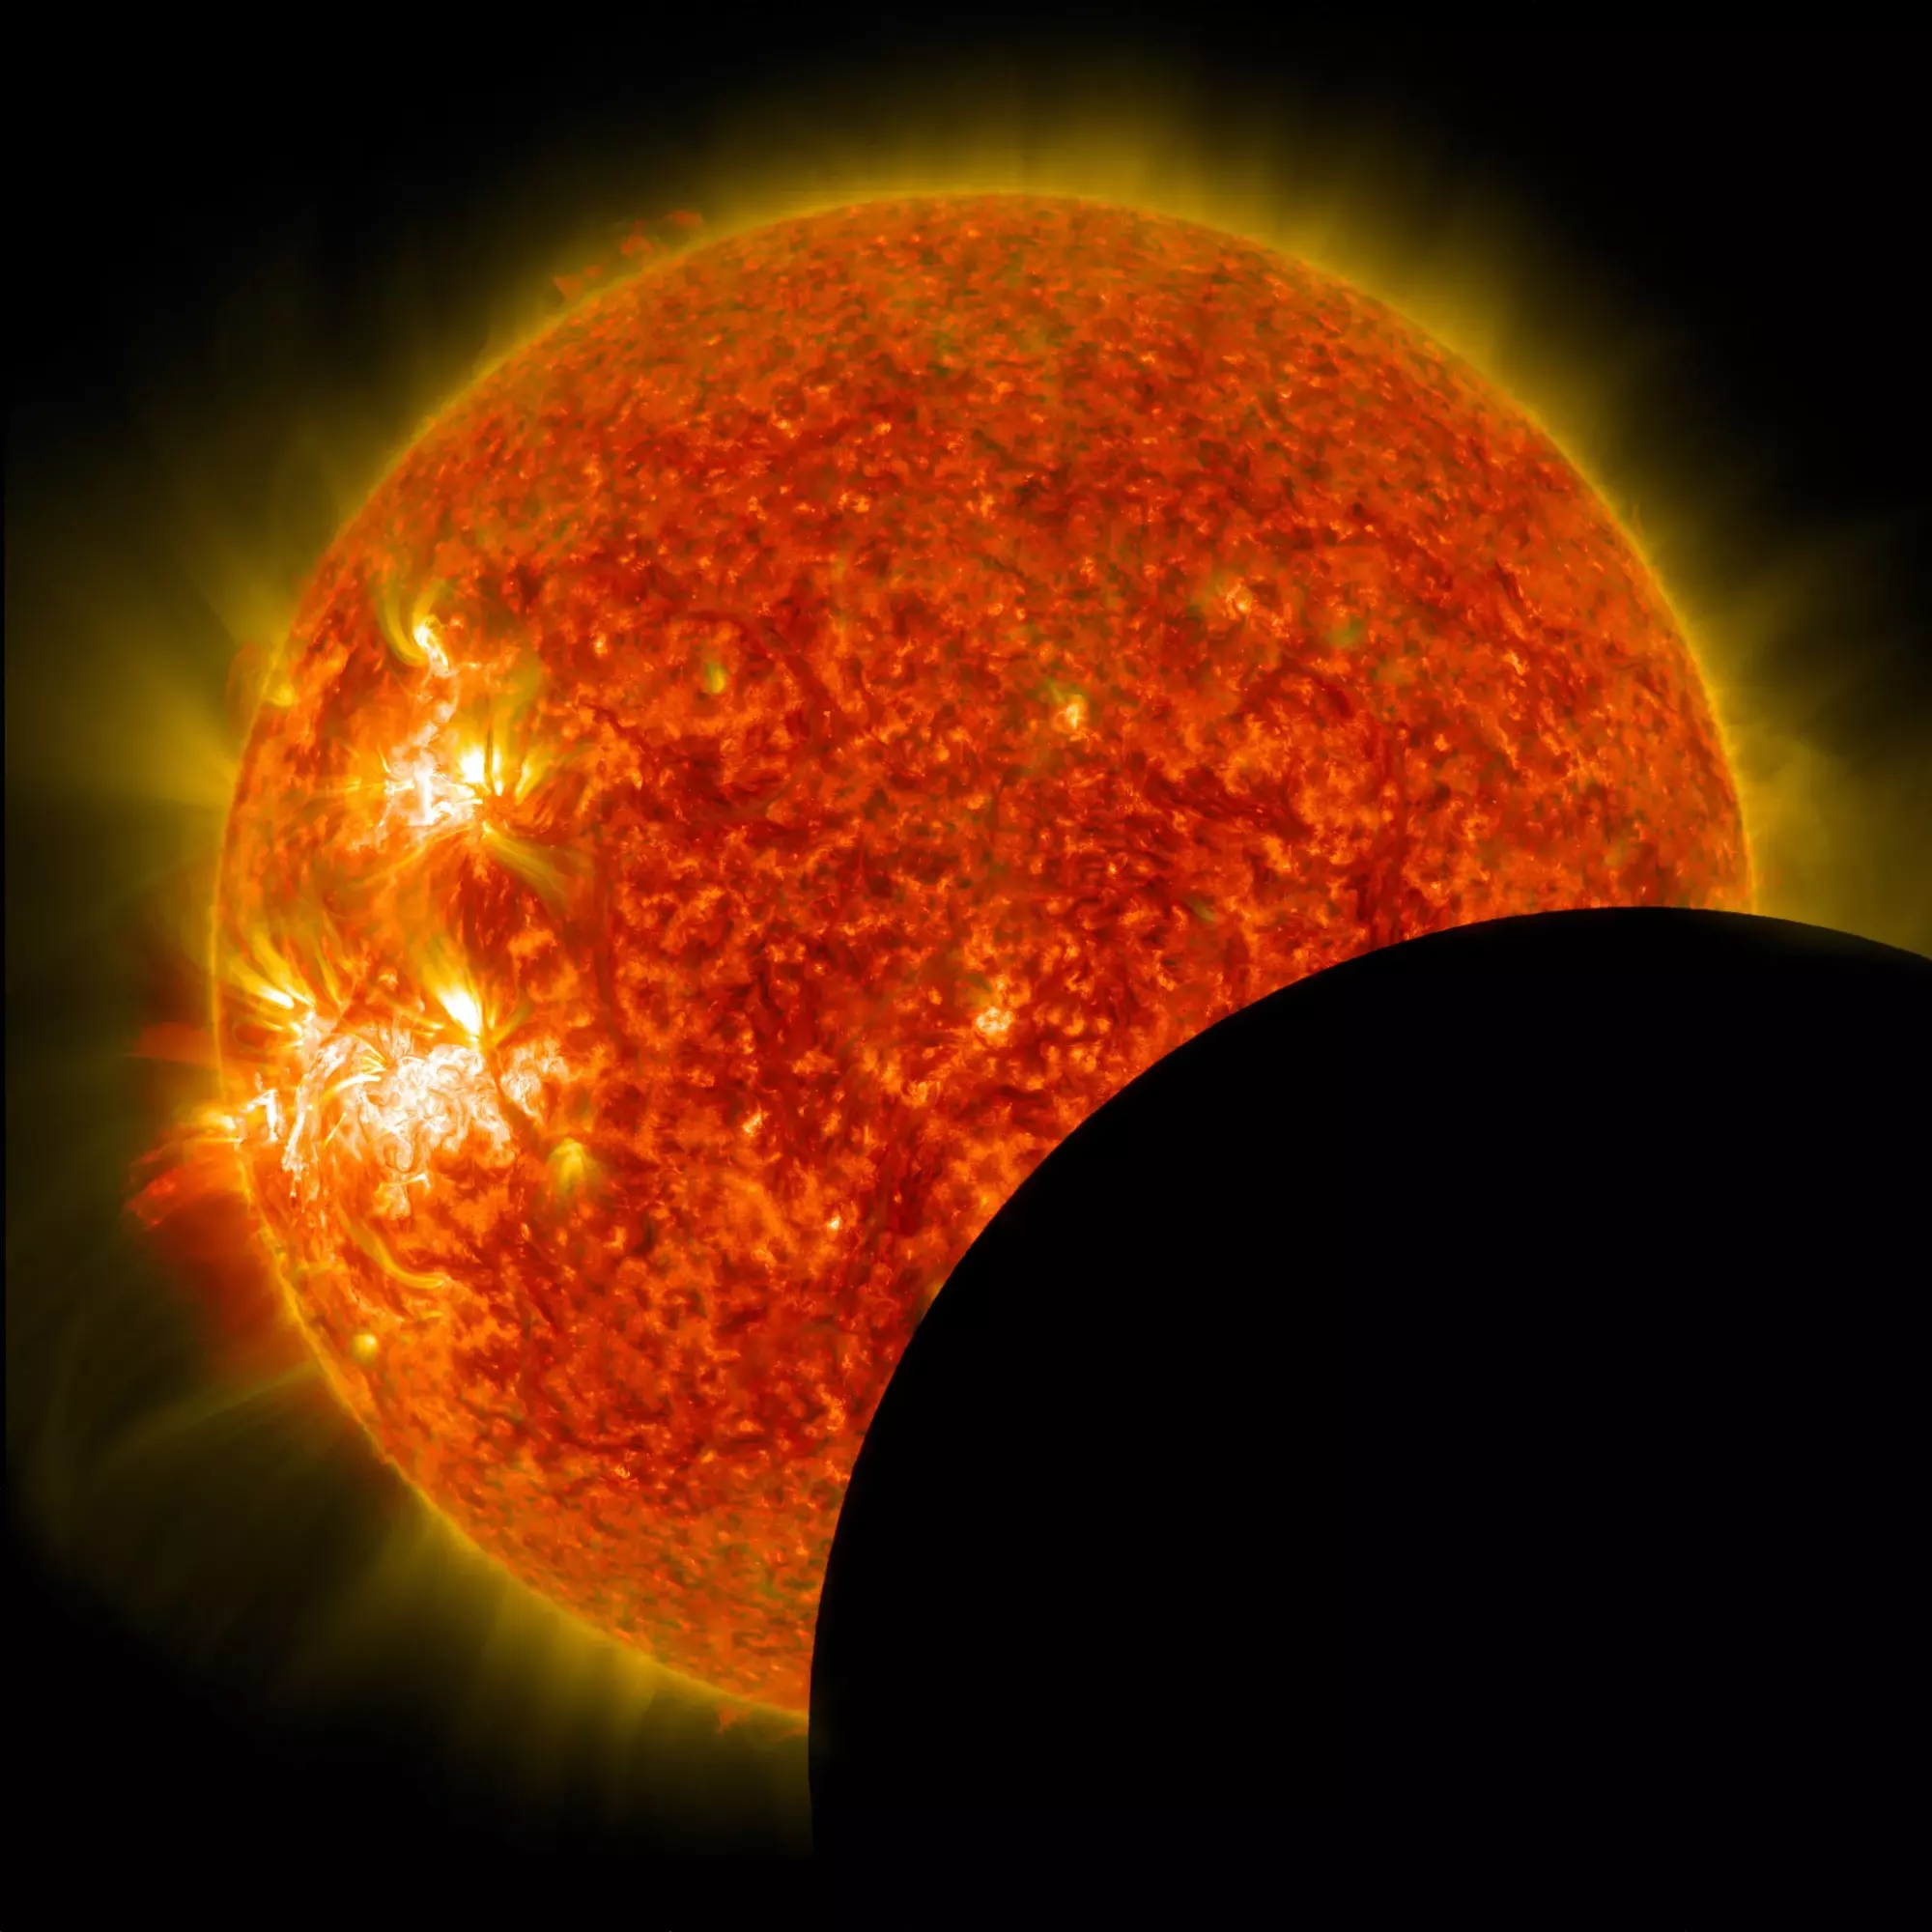 Moon blocking part of the sun during an eclipse